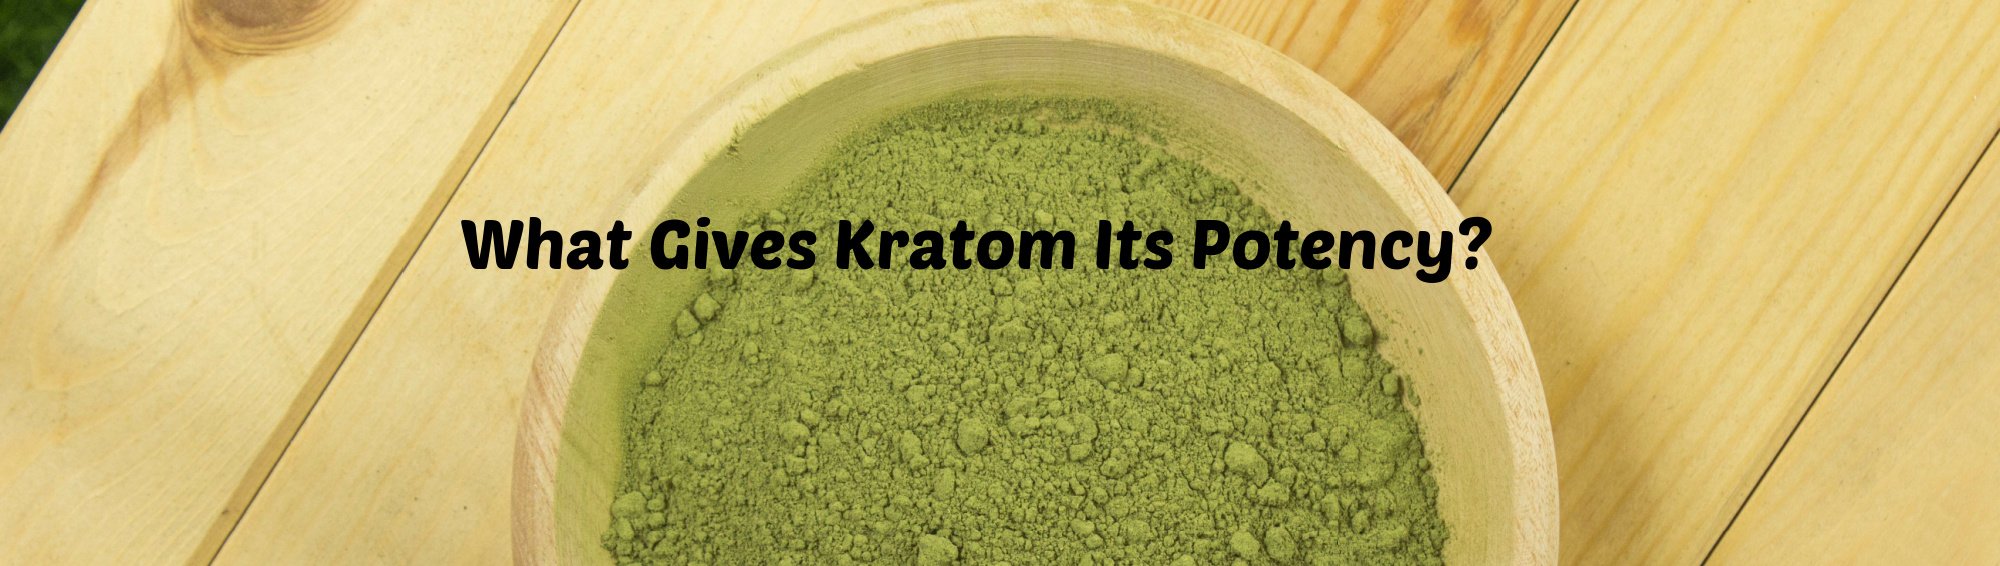 image of what gives kratom its potency